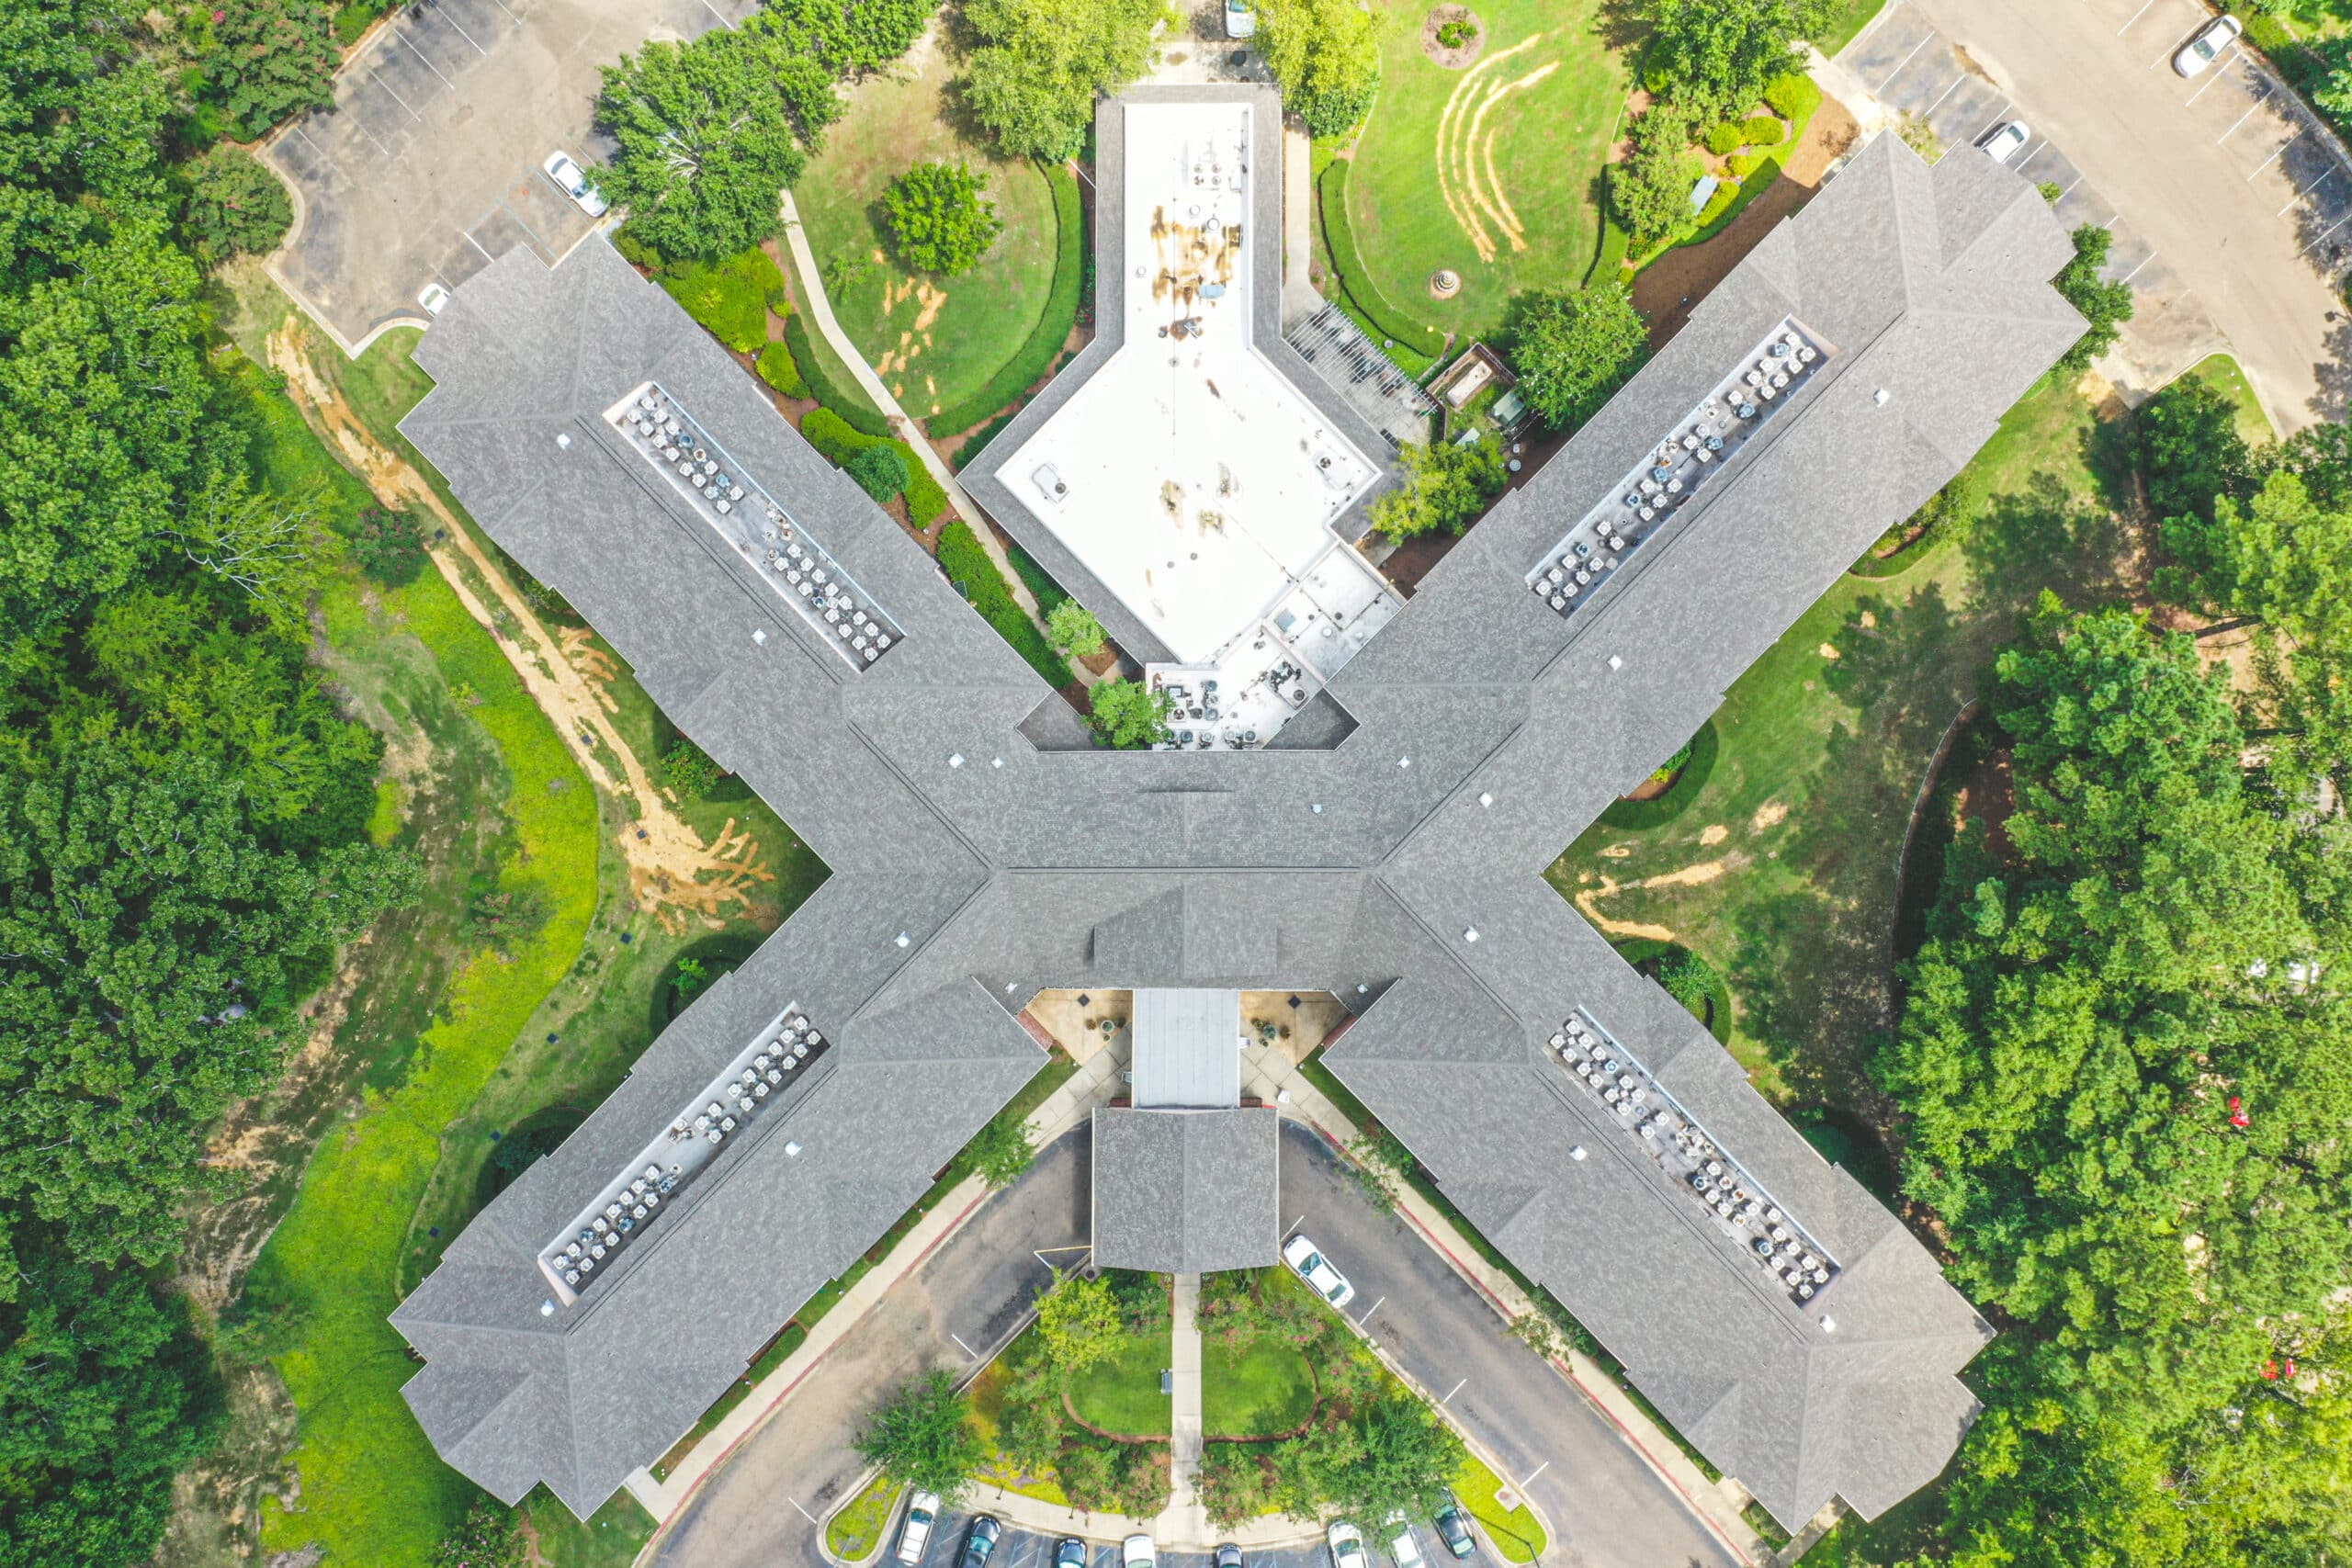 An overhead shot of a commercial building's roof